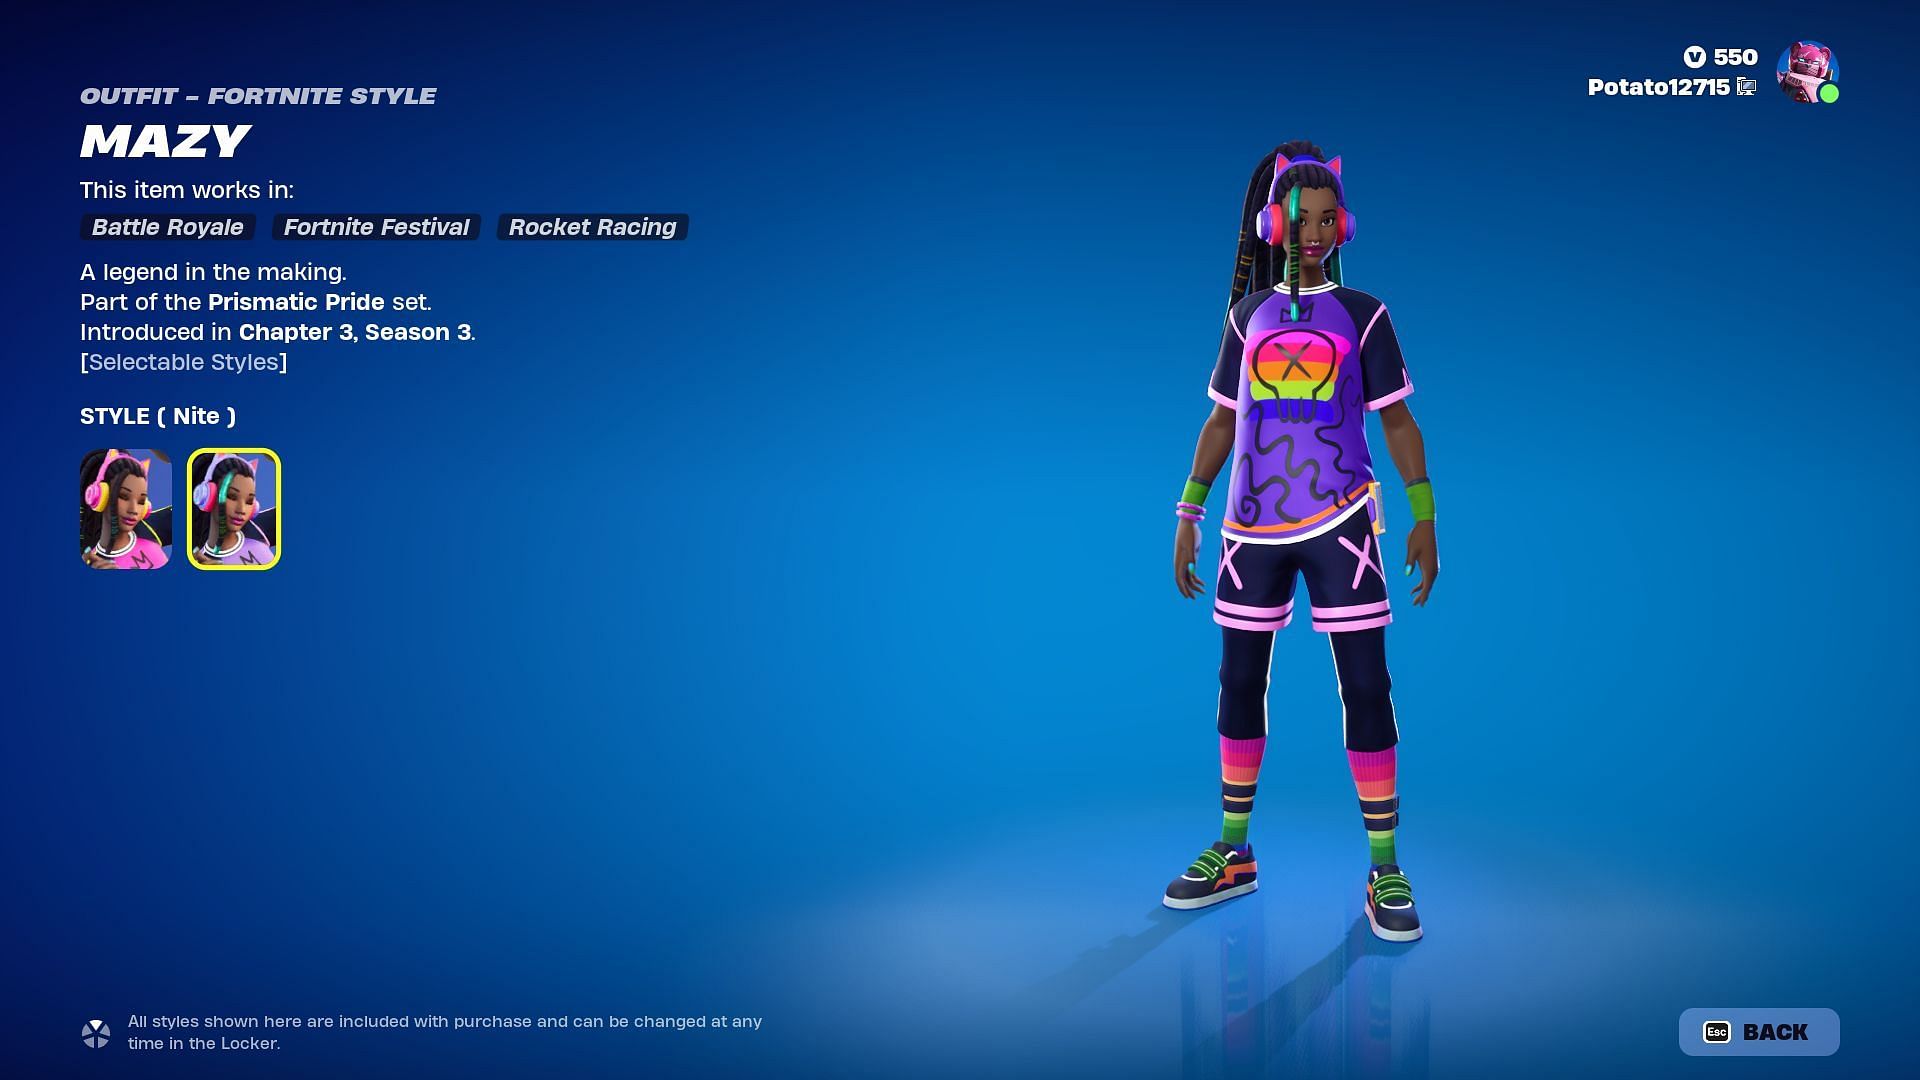 You can now purchase Mazy skin in Fortnite (Image via Epic Games)